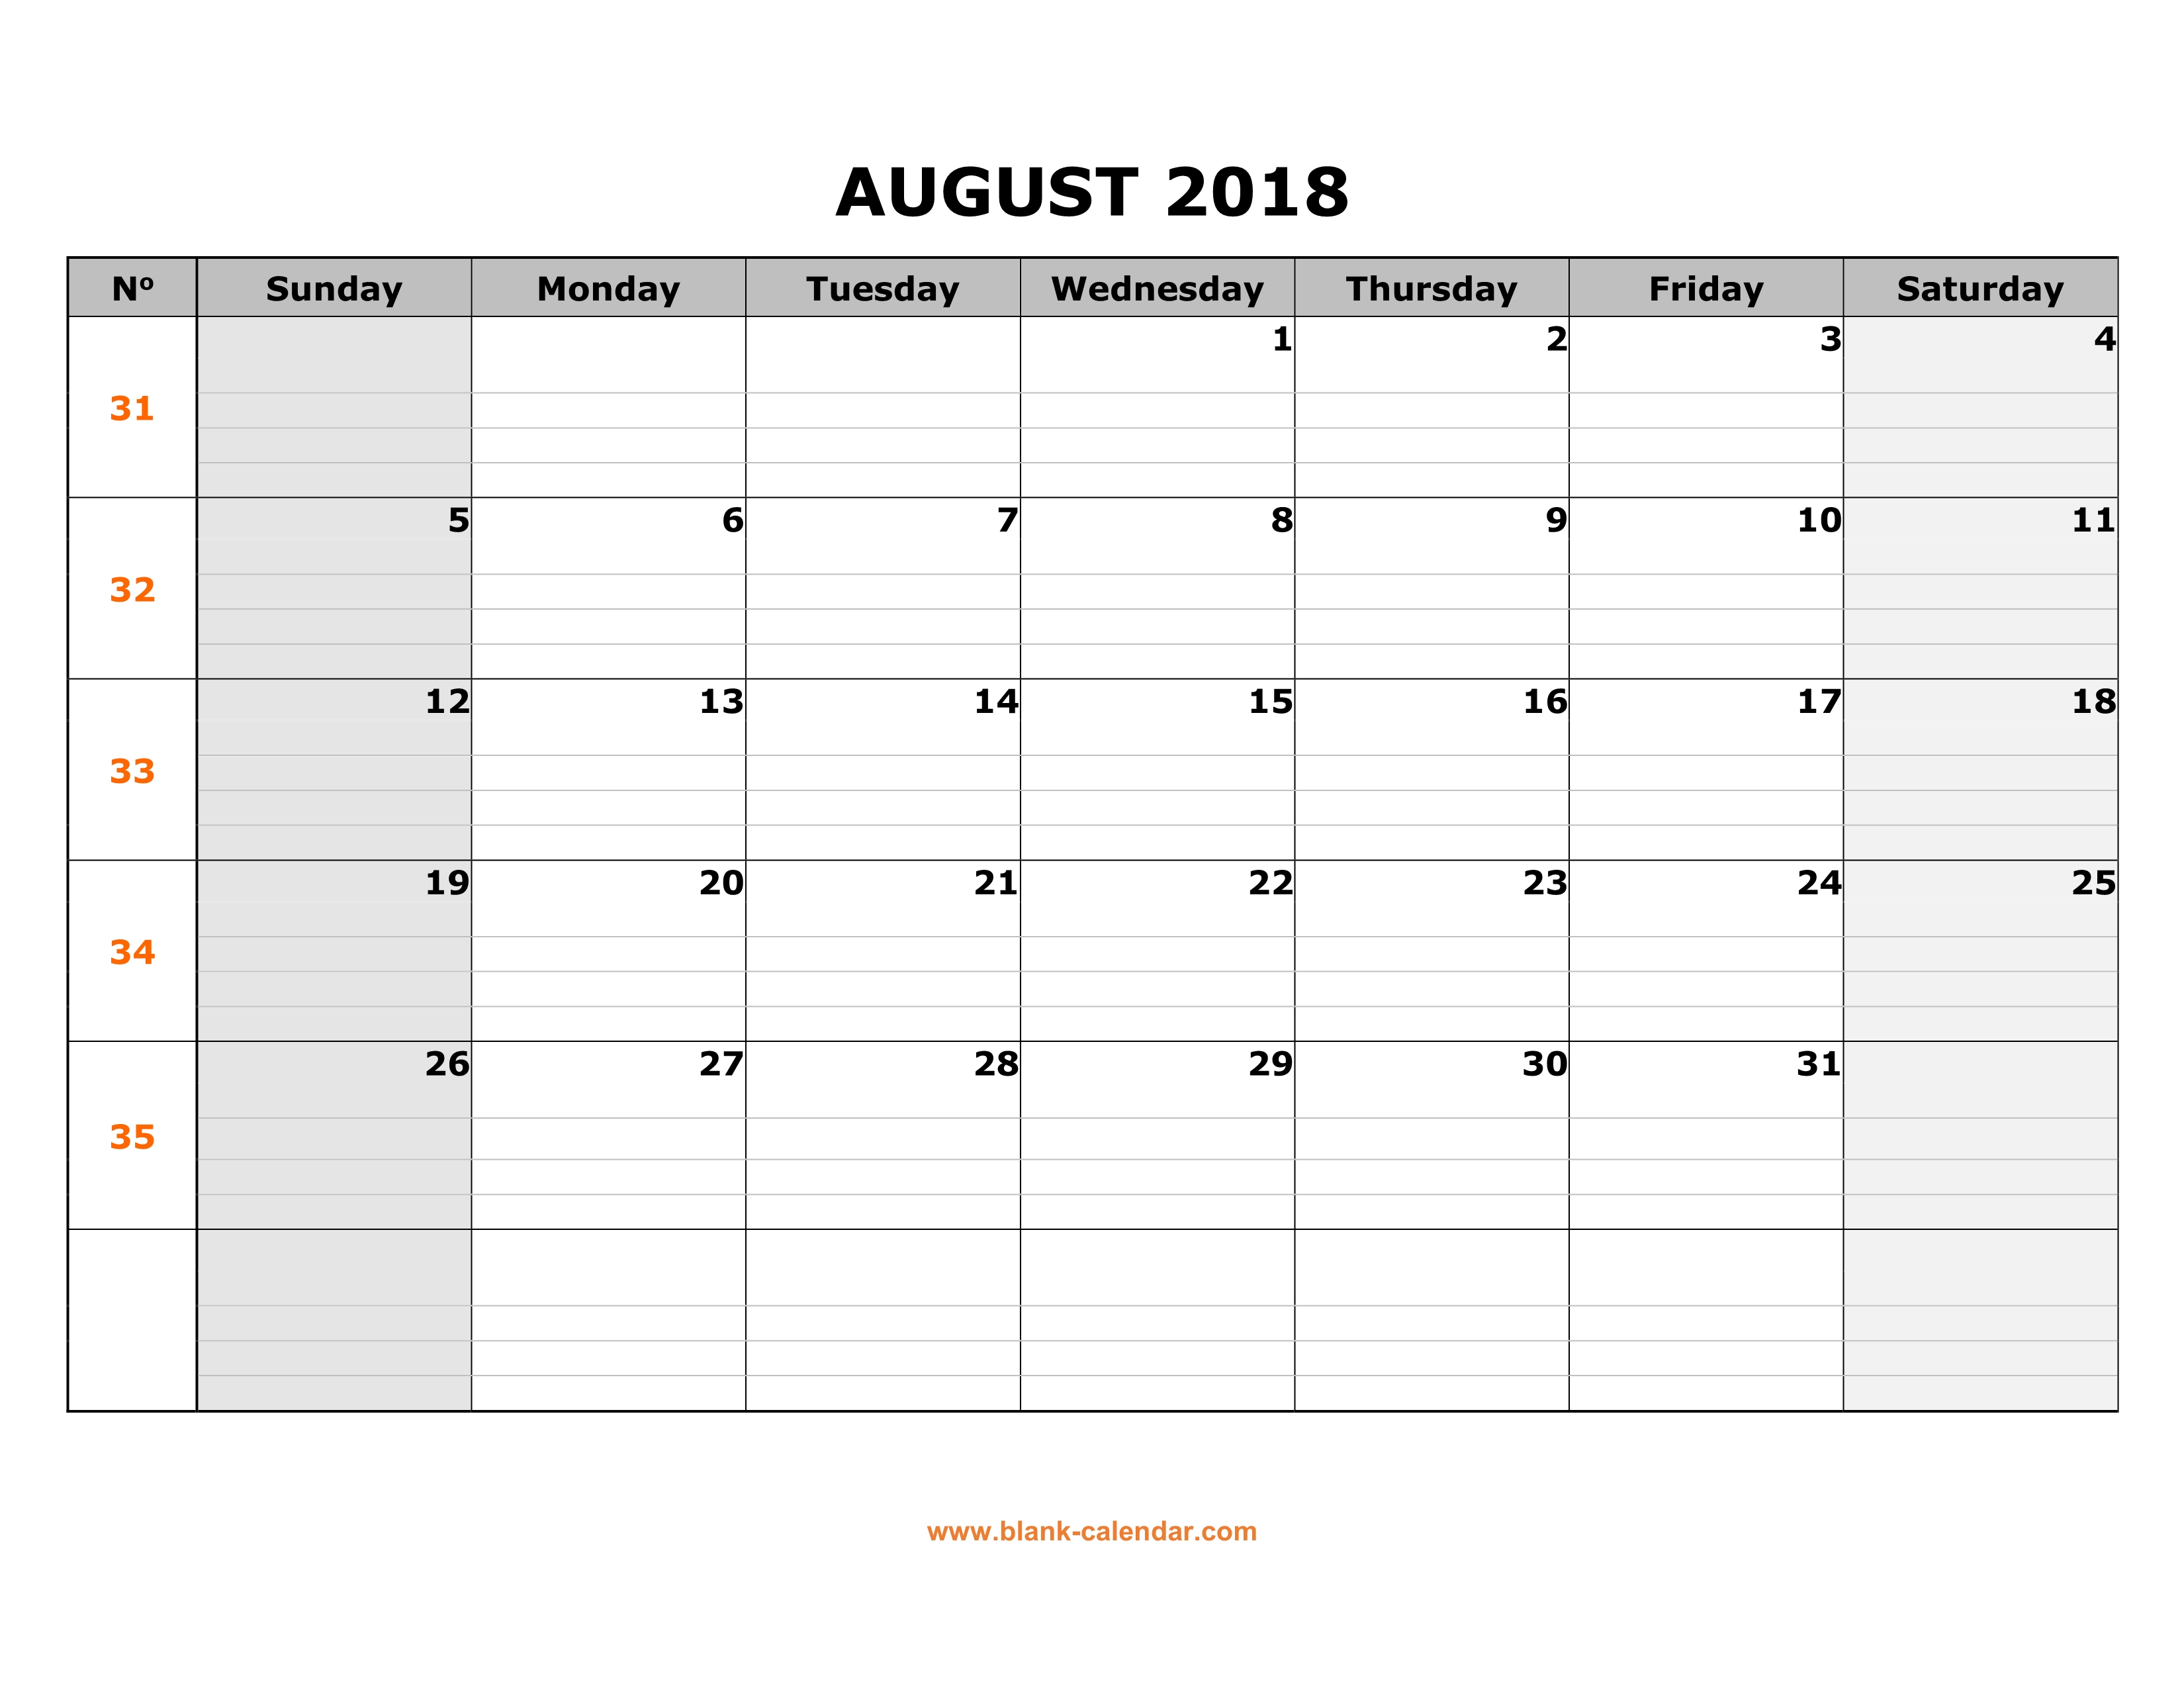 free-download-printable-august-2018-calendar-large-box-grid-space-for